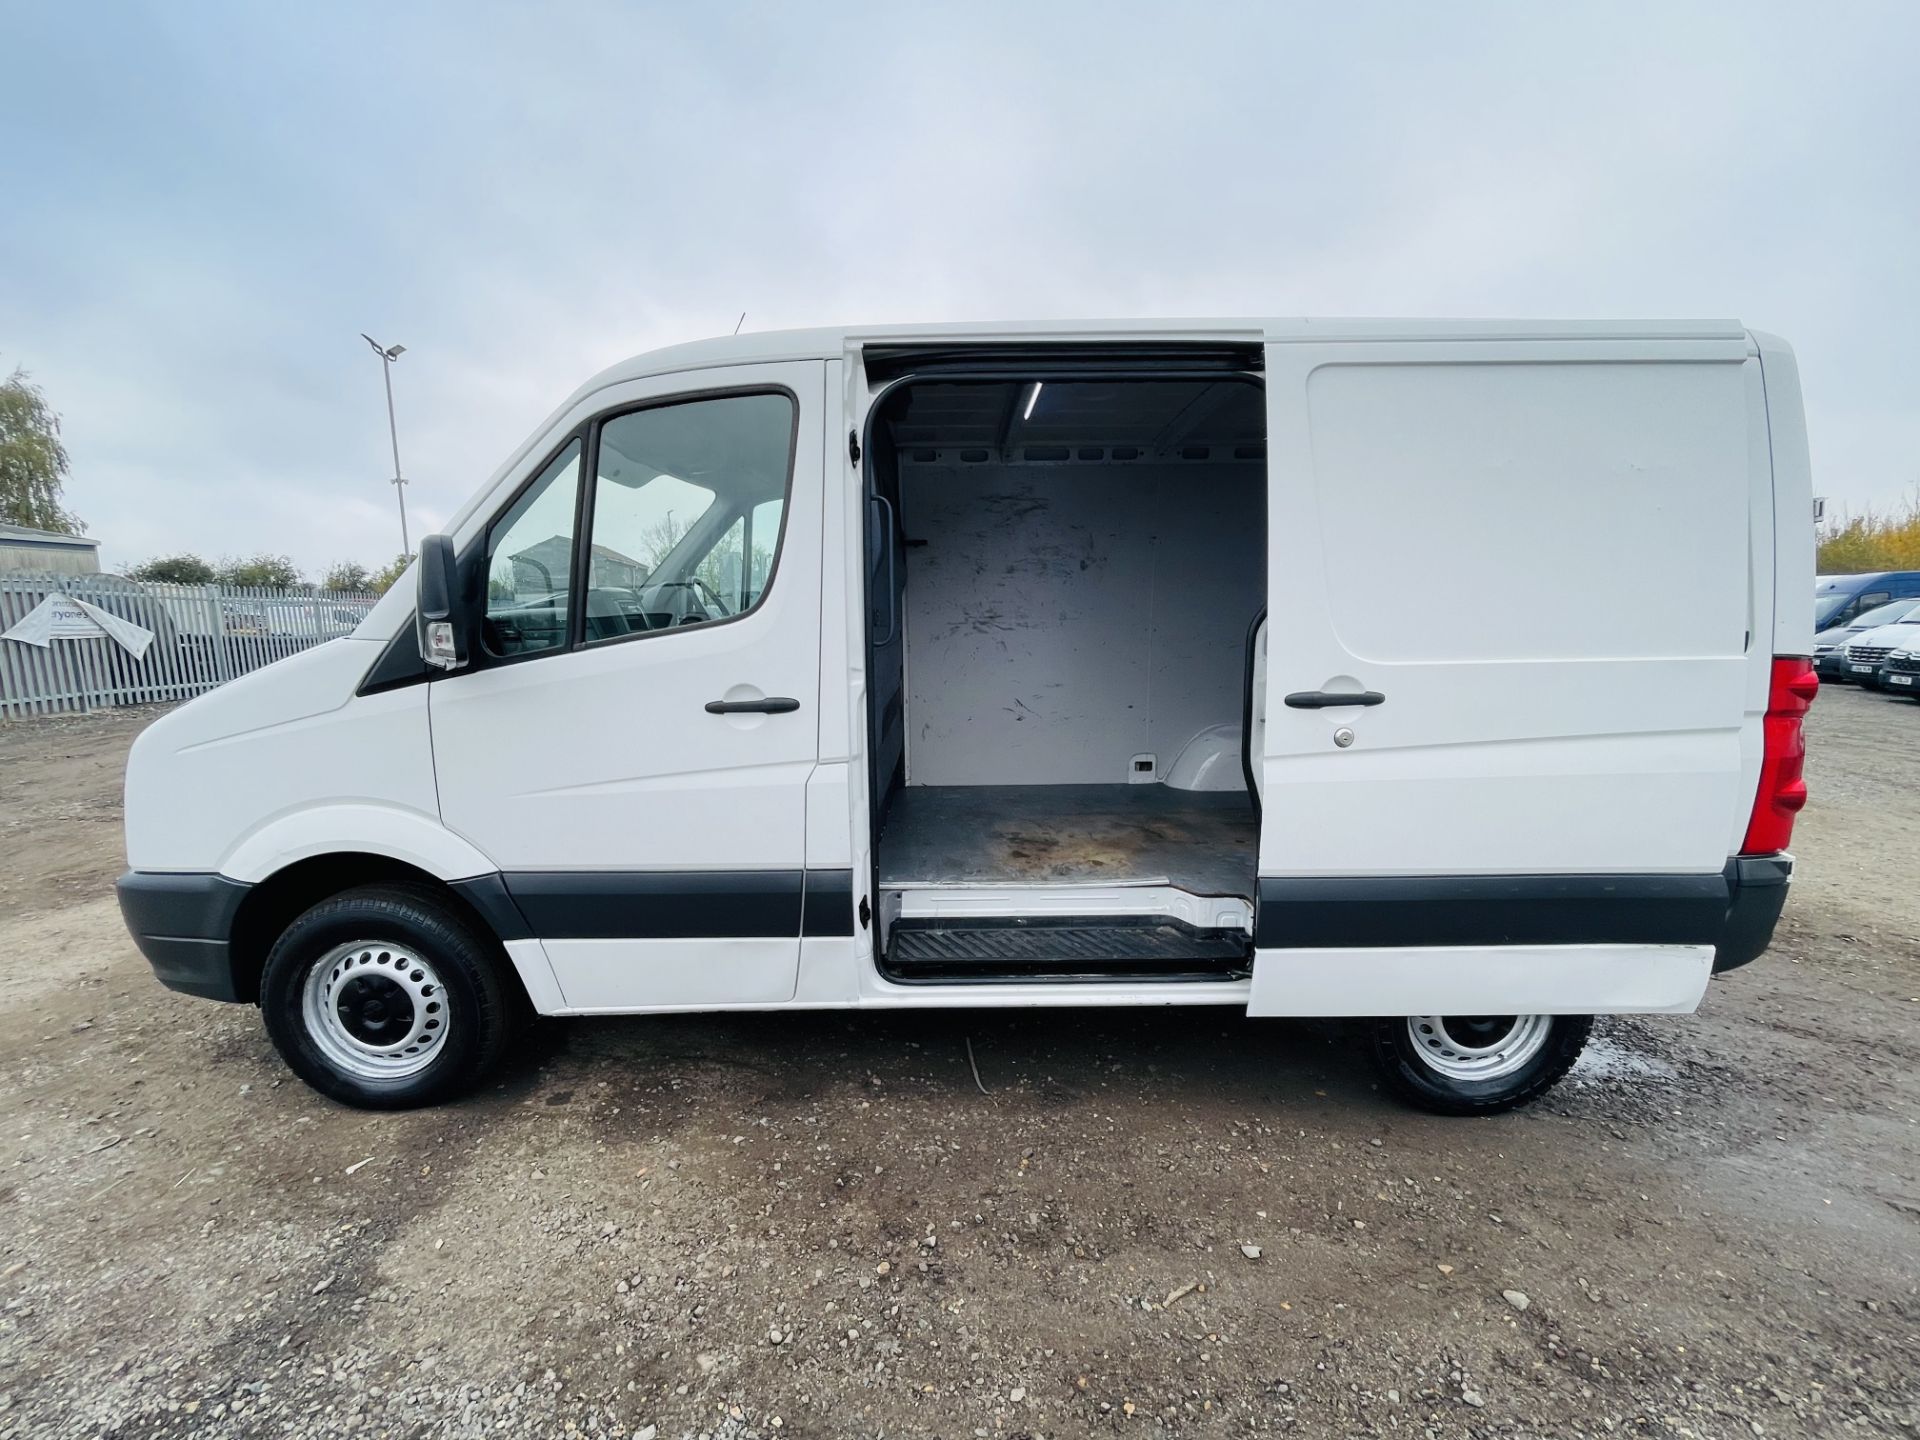 Volkswagen Crafter CR30 2.0 TDI 109 L1 H1 2012 ' 62 Reg' - Air Con - No Vat Save 20% - Image 10 of 19